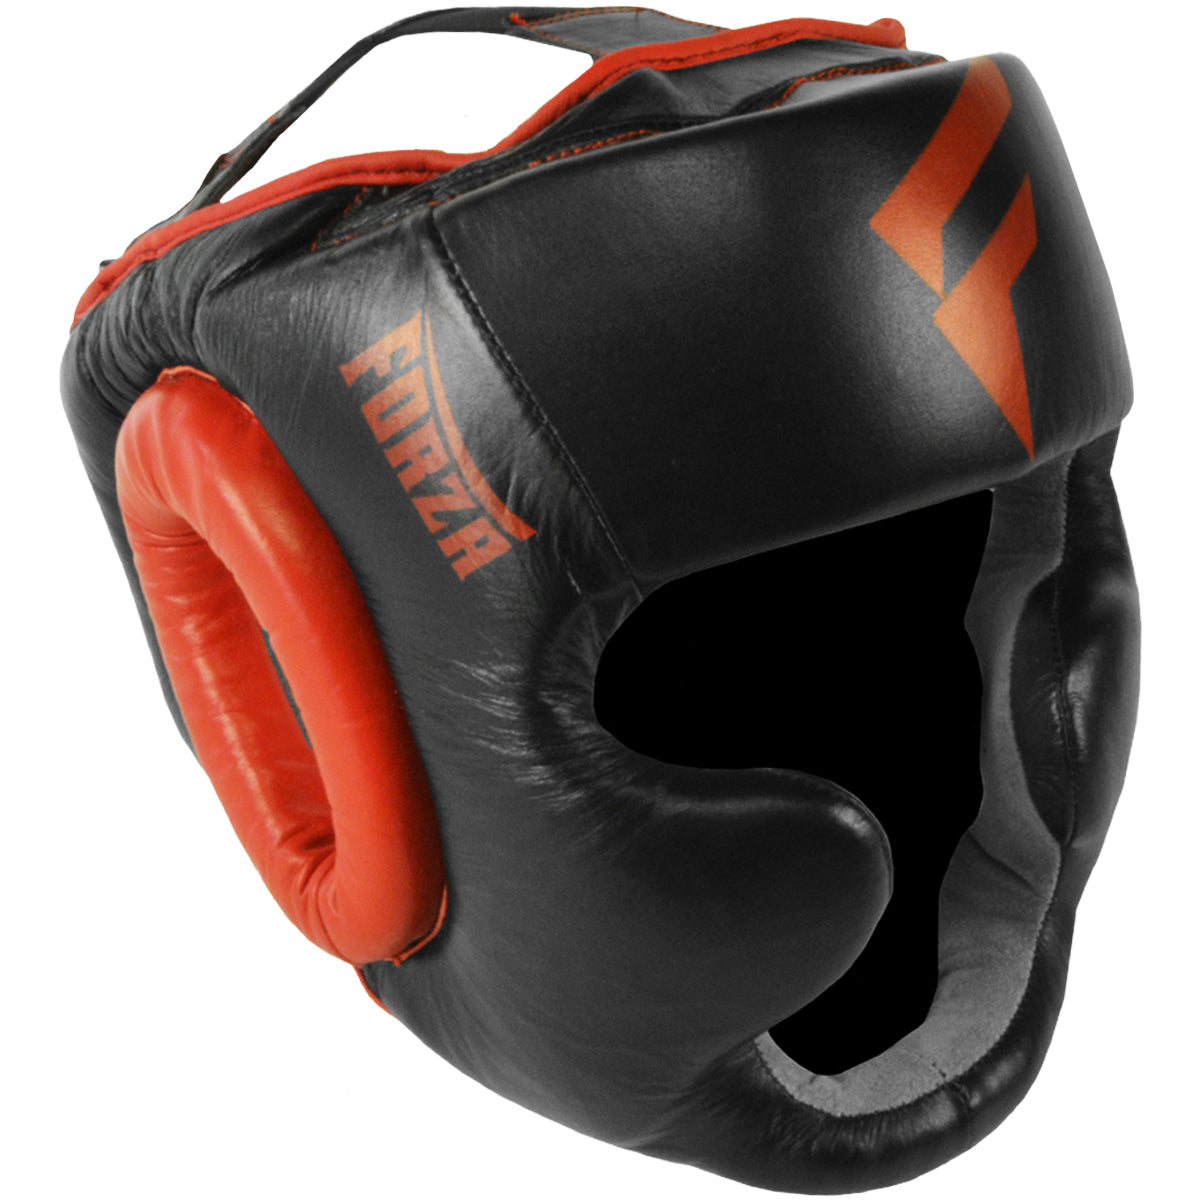 Forza Sports Leather Full Face Boxing and MMA Headgear - Black/Red Forza Sports